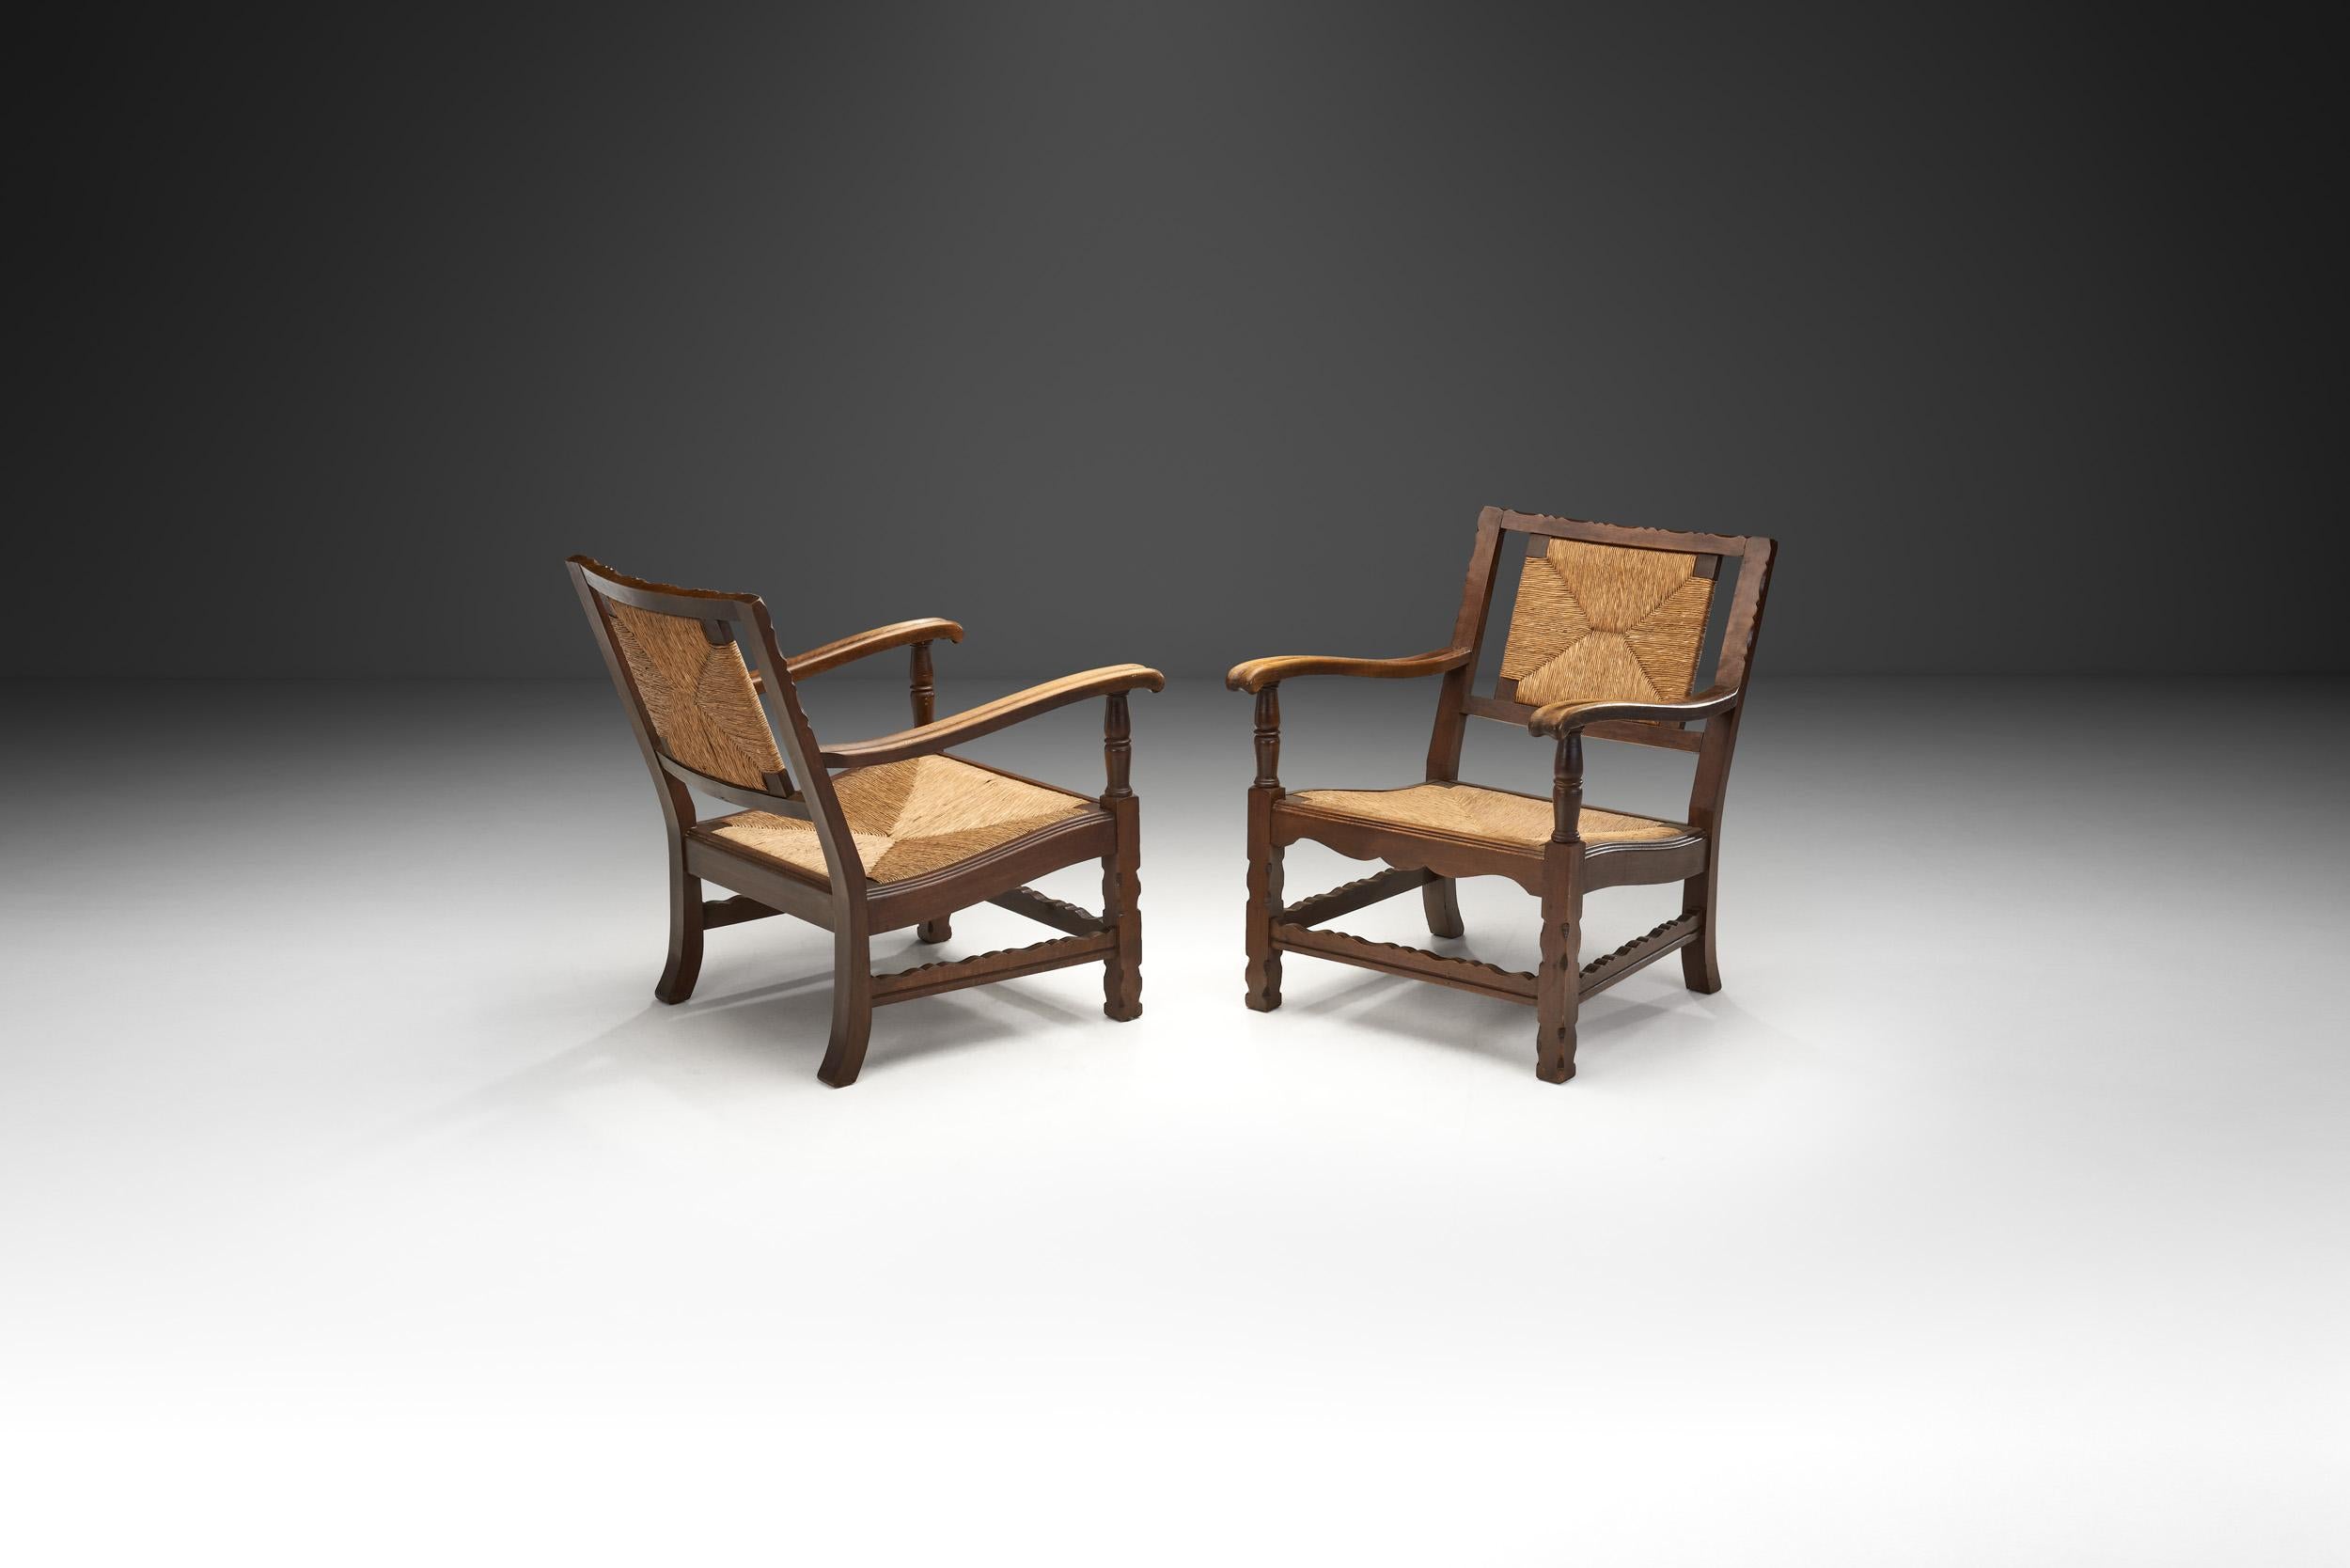 European Mid-Century Handcrafted Wood and Woven Straw Armchairs, Europe ca 1950s For Sale